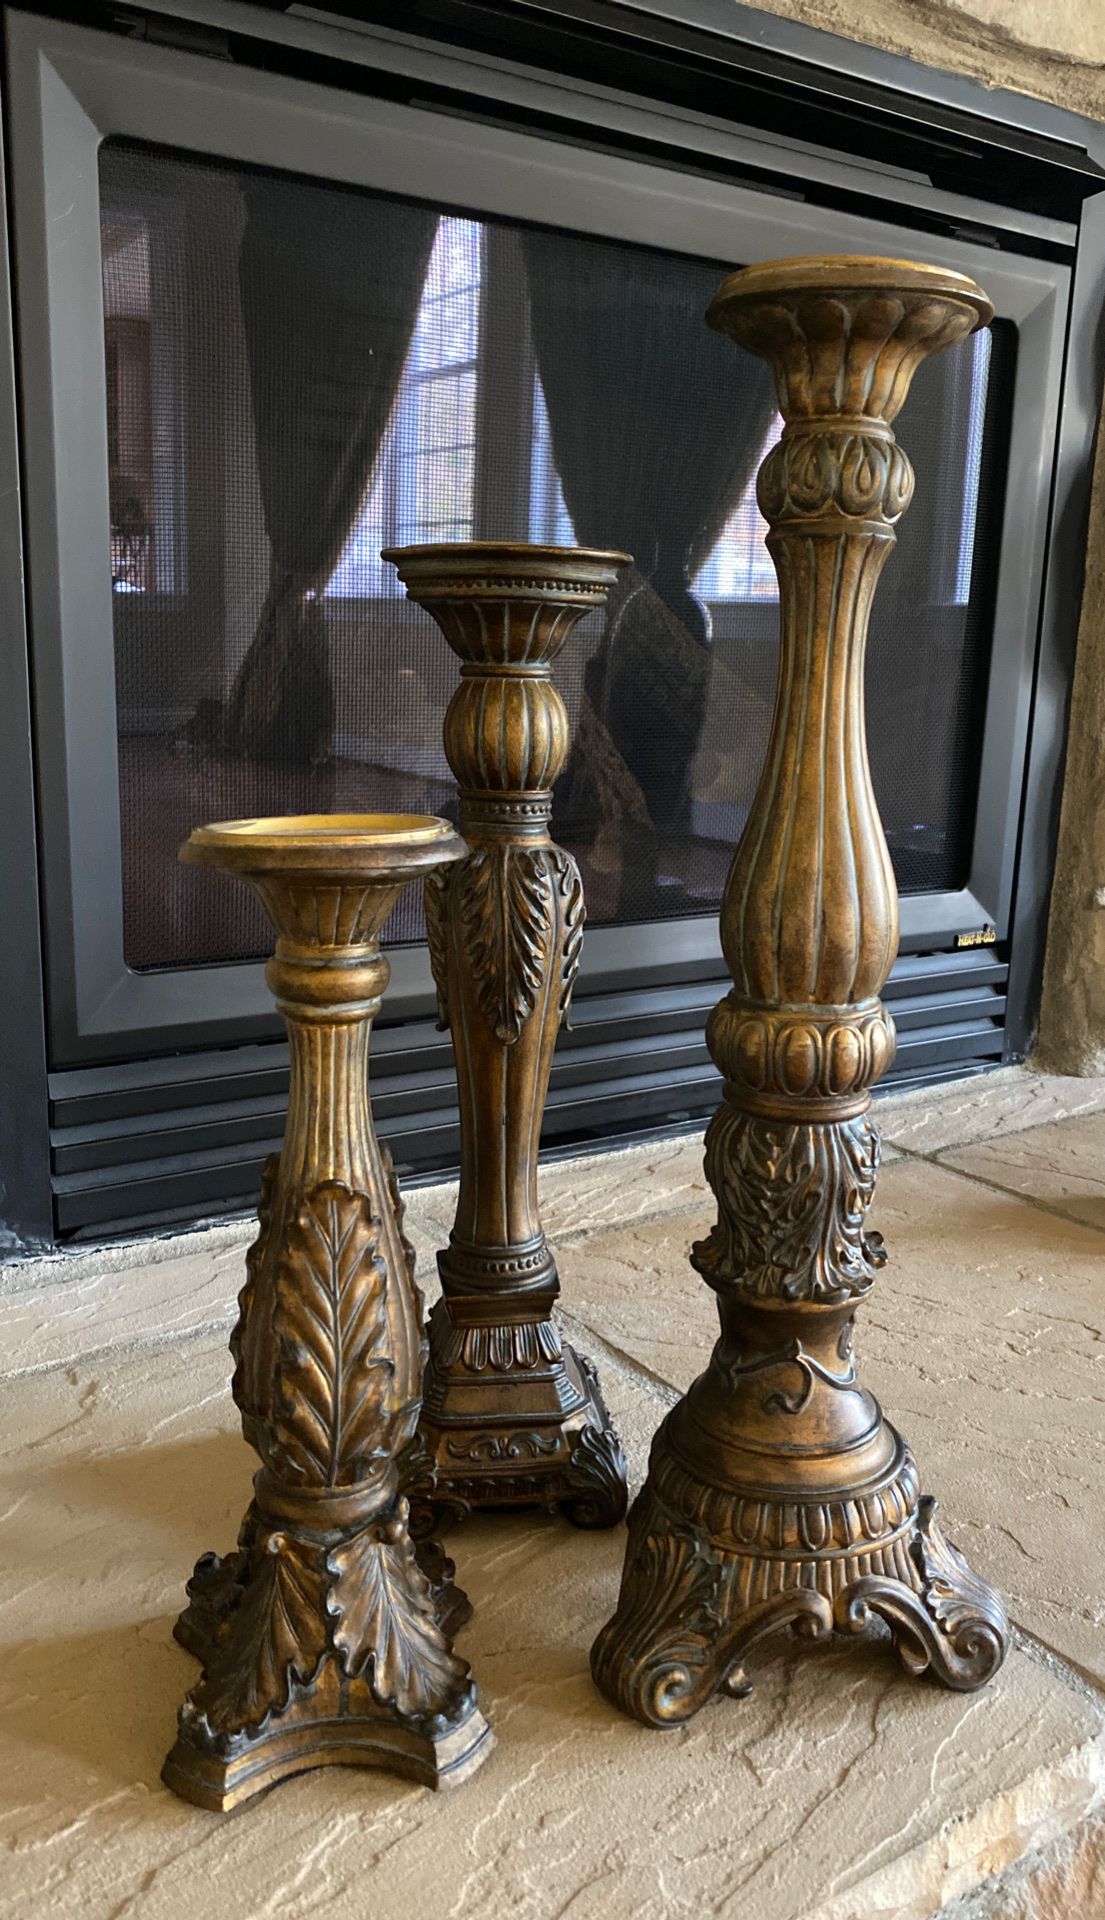 3 Candleholders - $15 for all three